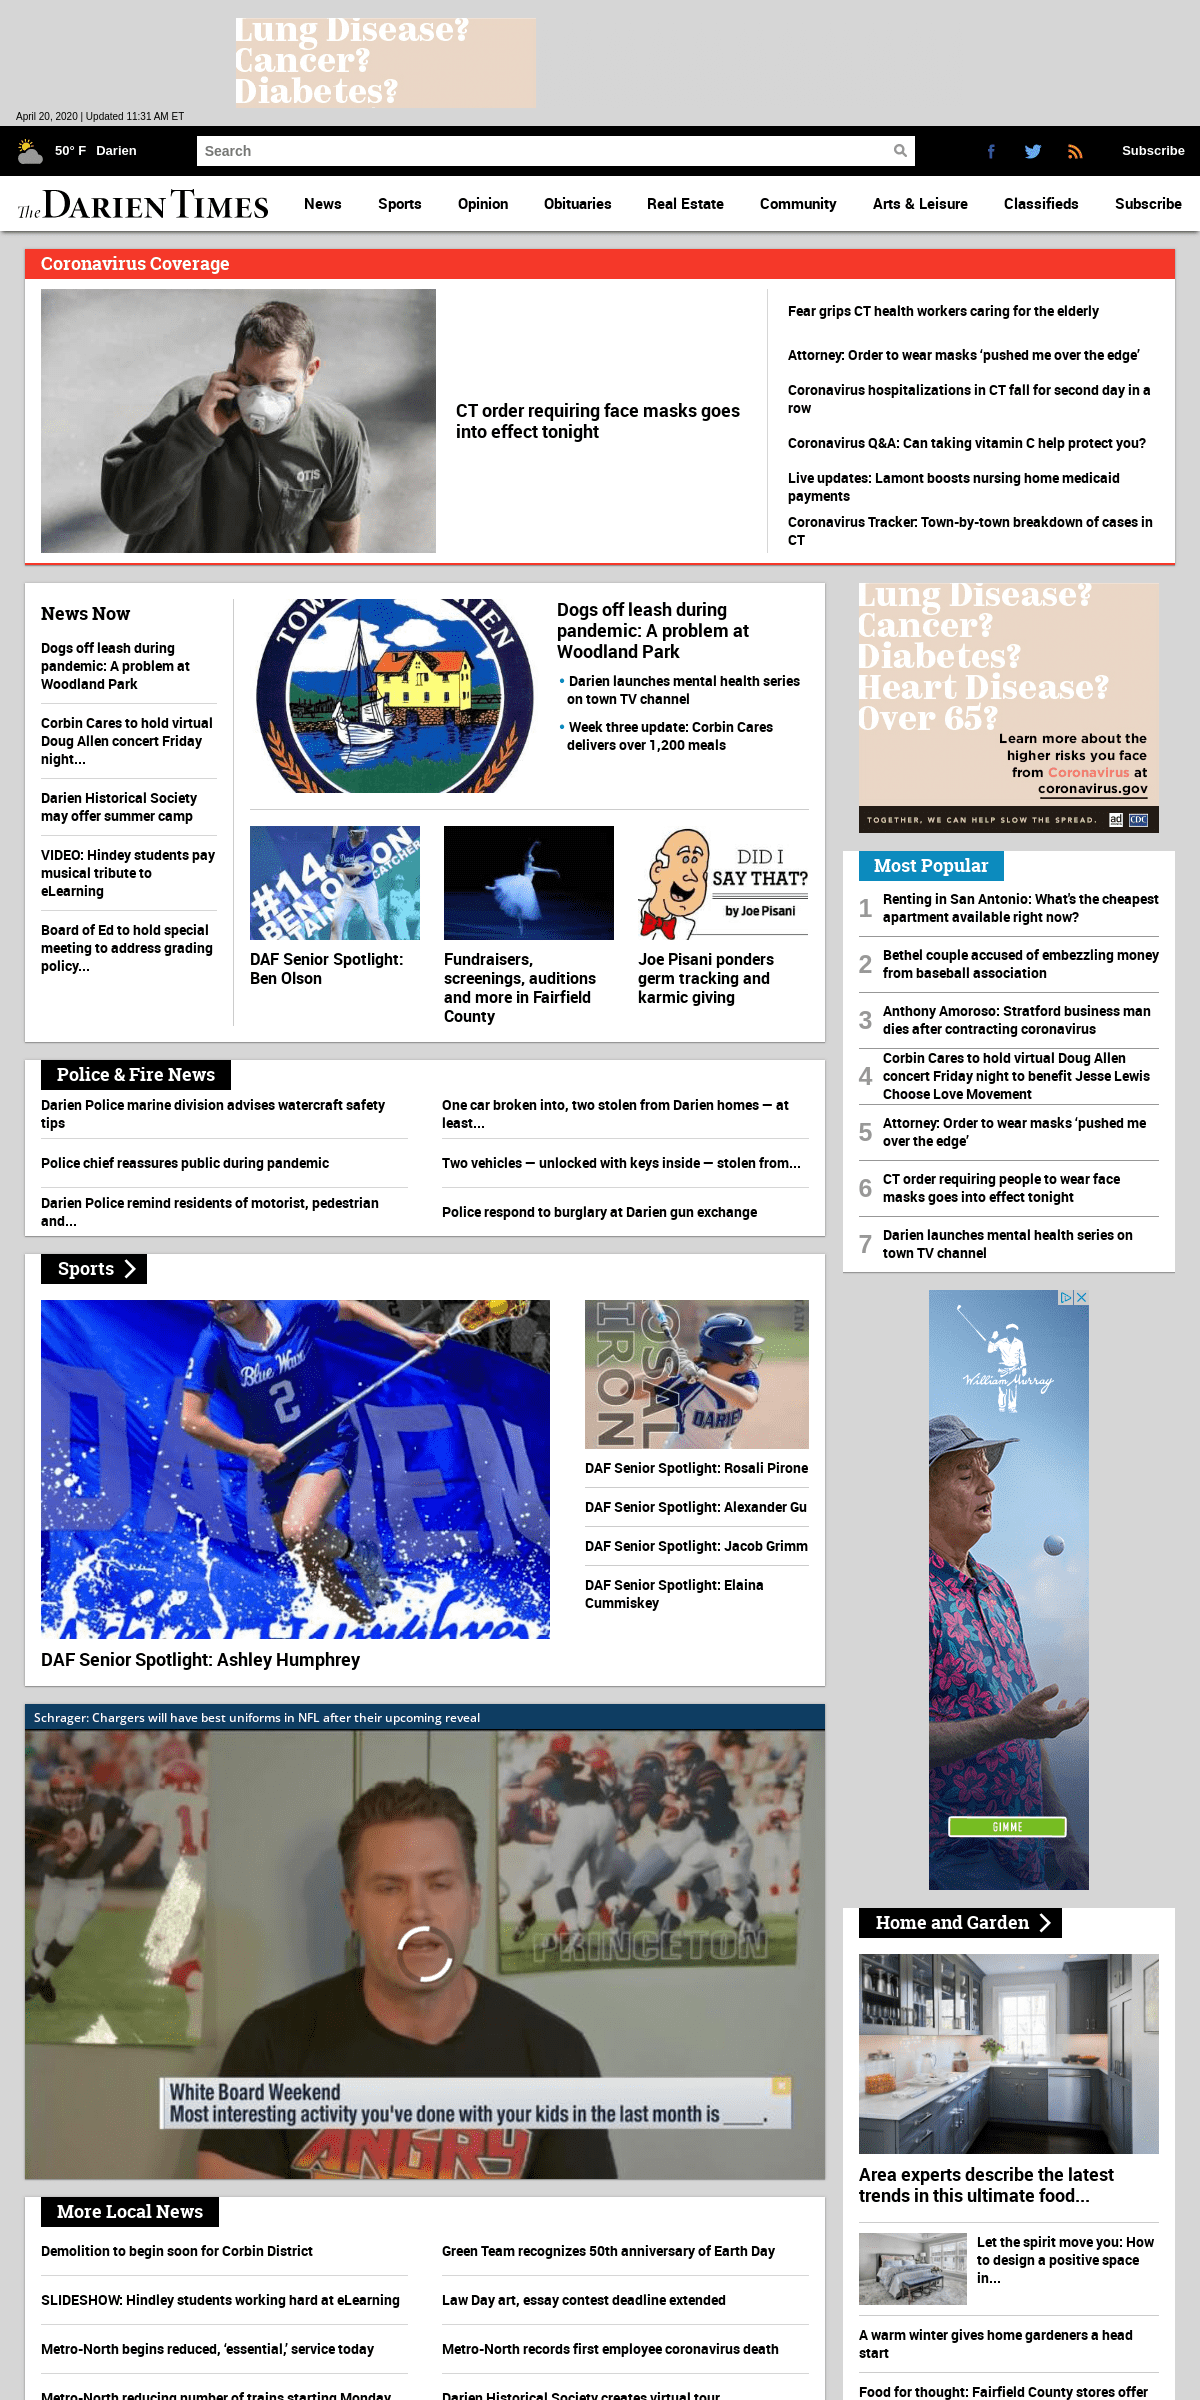 A complete backup of dariennewsonline.com